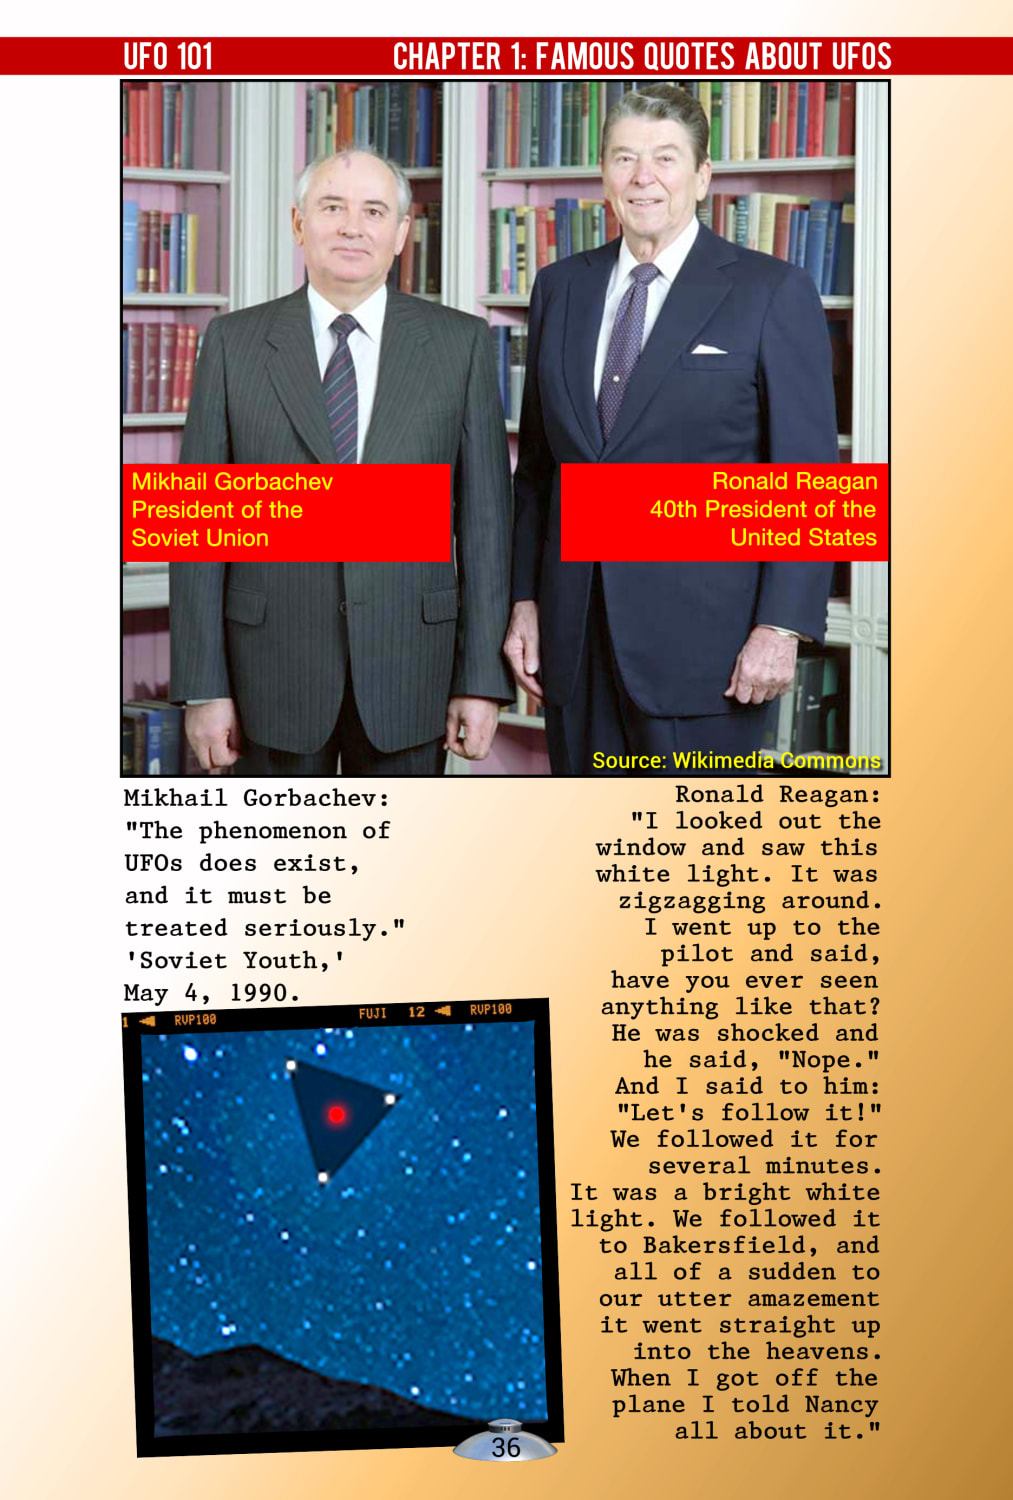 Famous quotes about UFOs excerpt from our book "UFO 101: A Visual Reference for Beginners" with Mikhail Gorbachev and Ronald Reagan